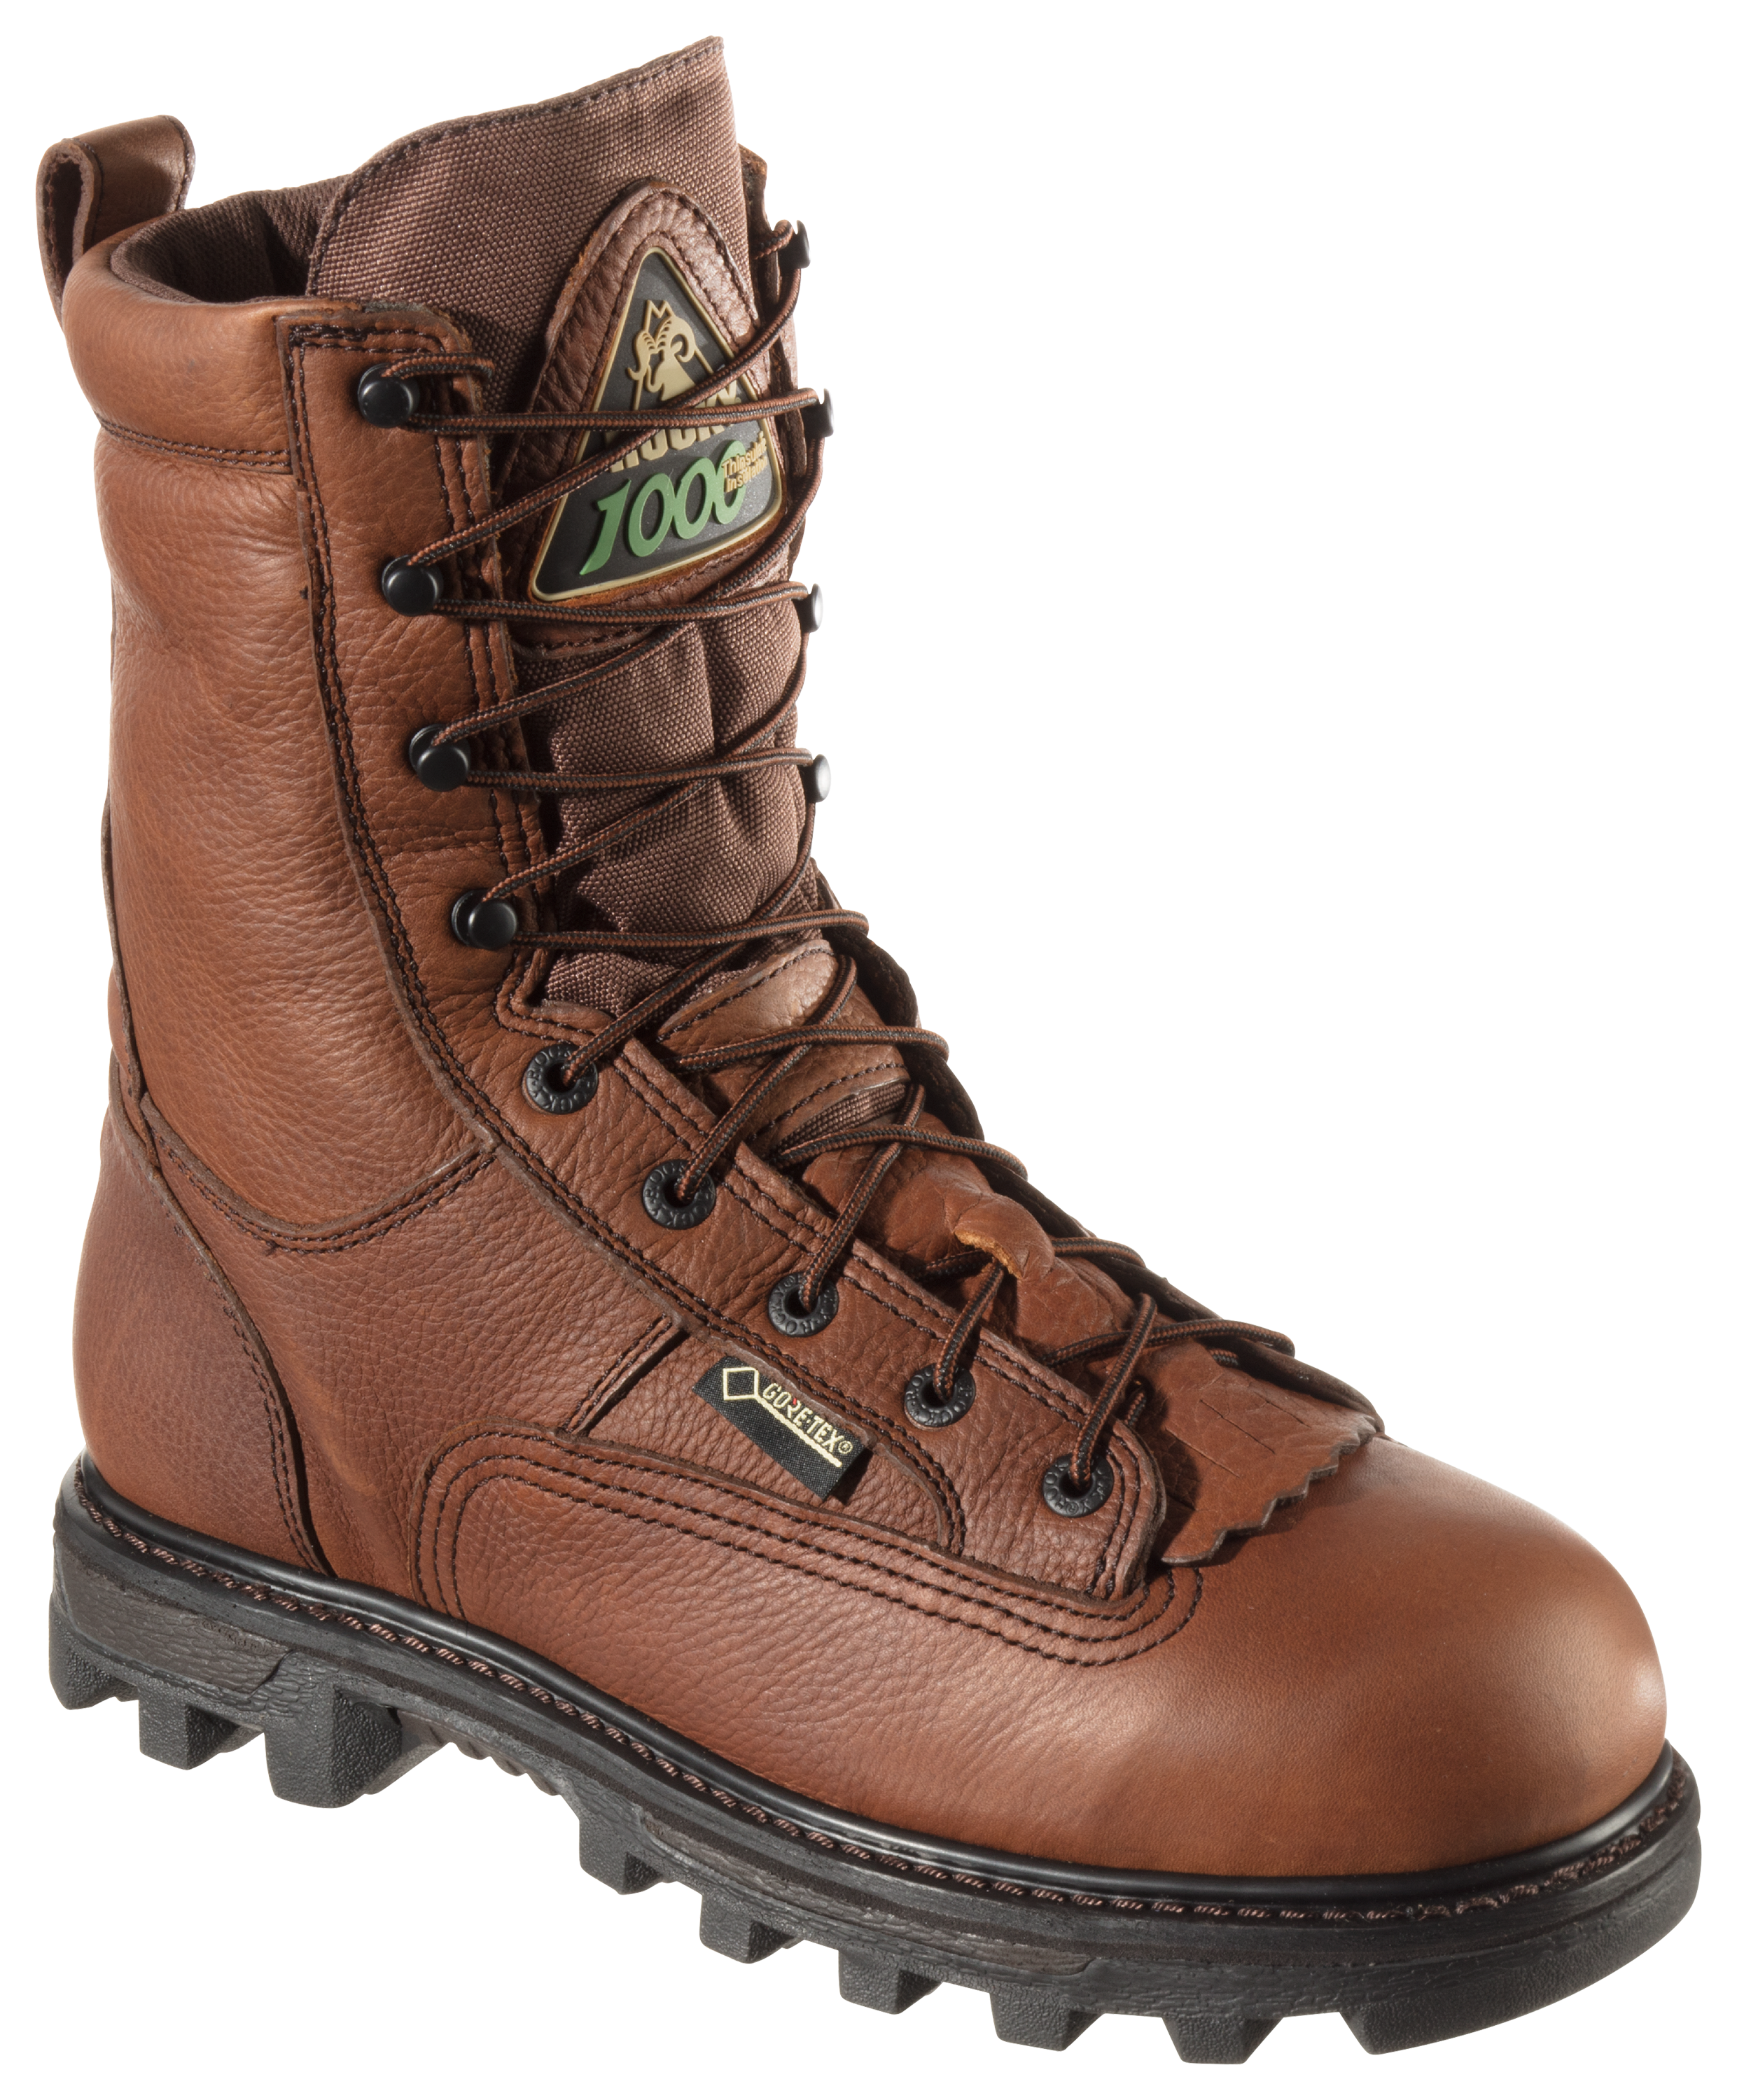 ROCKY BearClaw 3D GORE-TEX 1,000-Gram Insulated Hunting Boots for Men - Brown - 11M